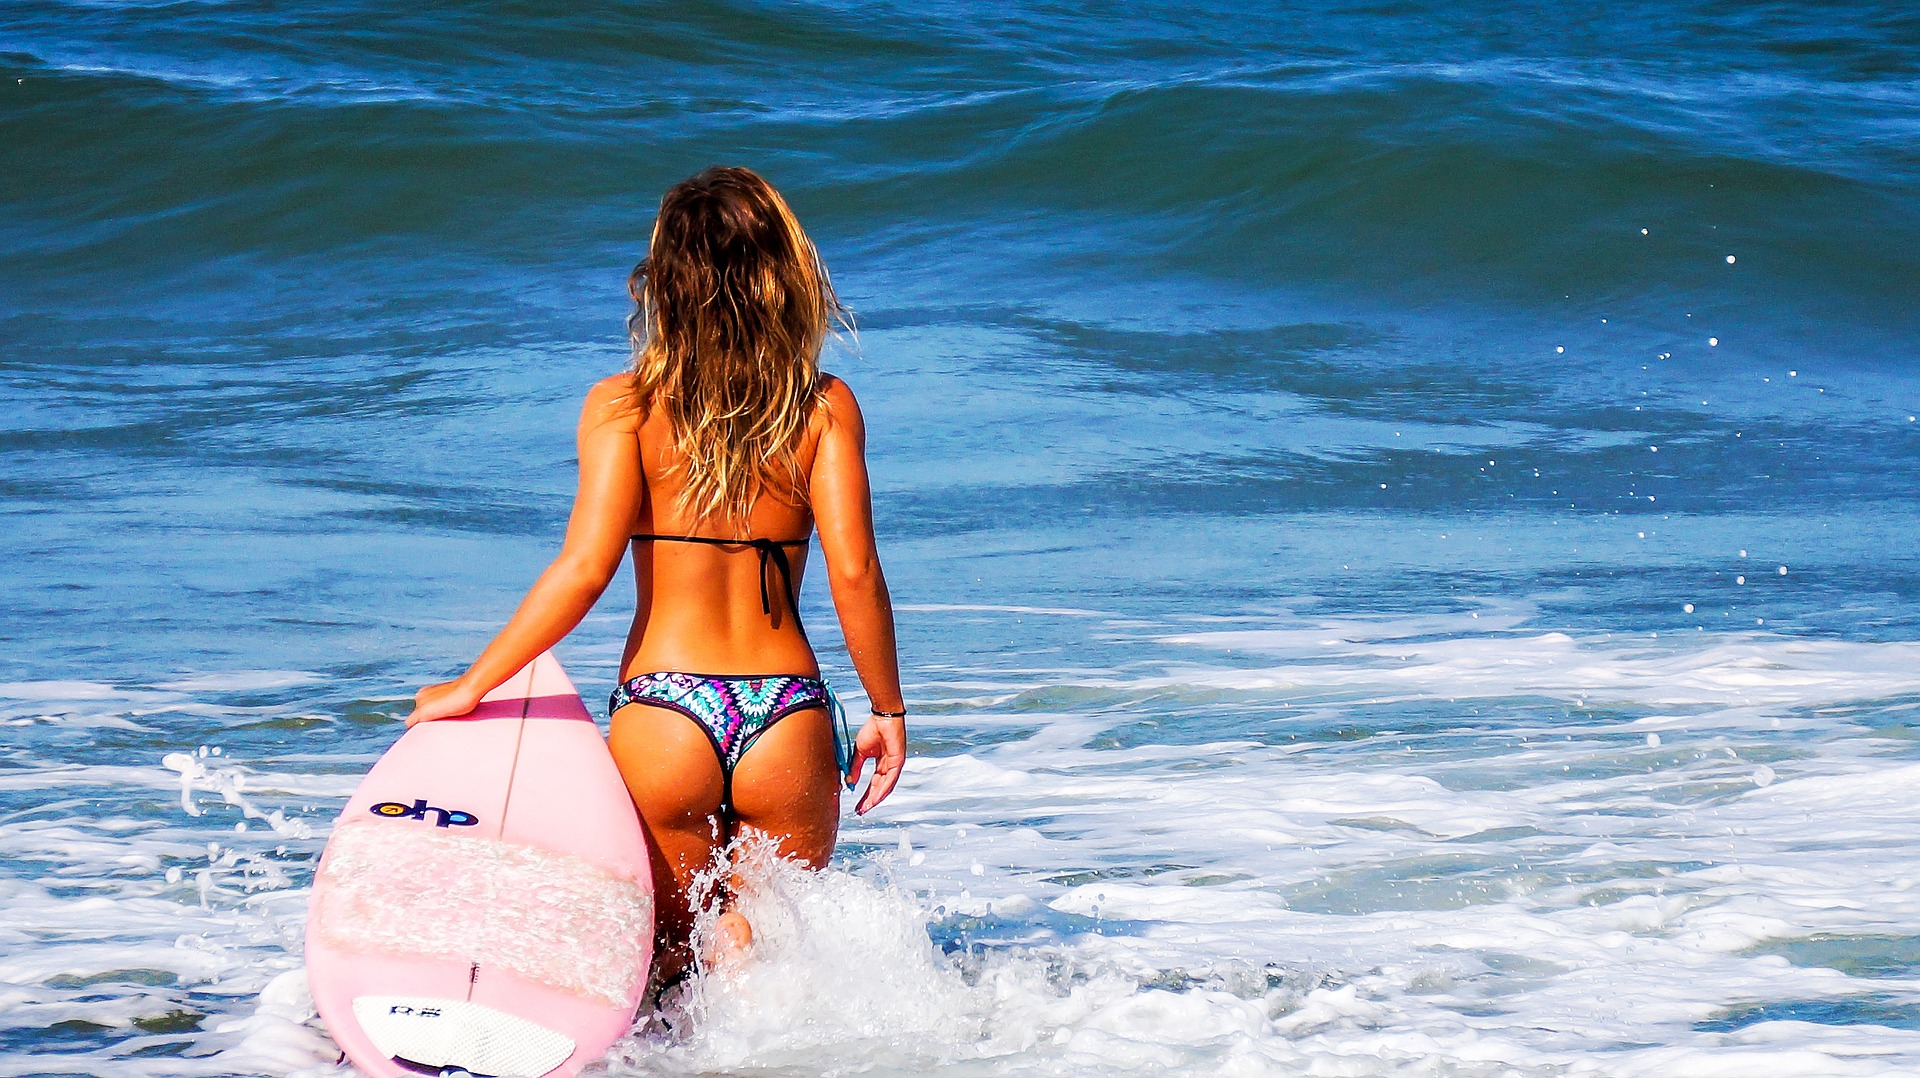 Sexy surfer woman with hot ass in ocean